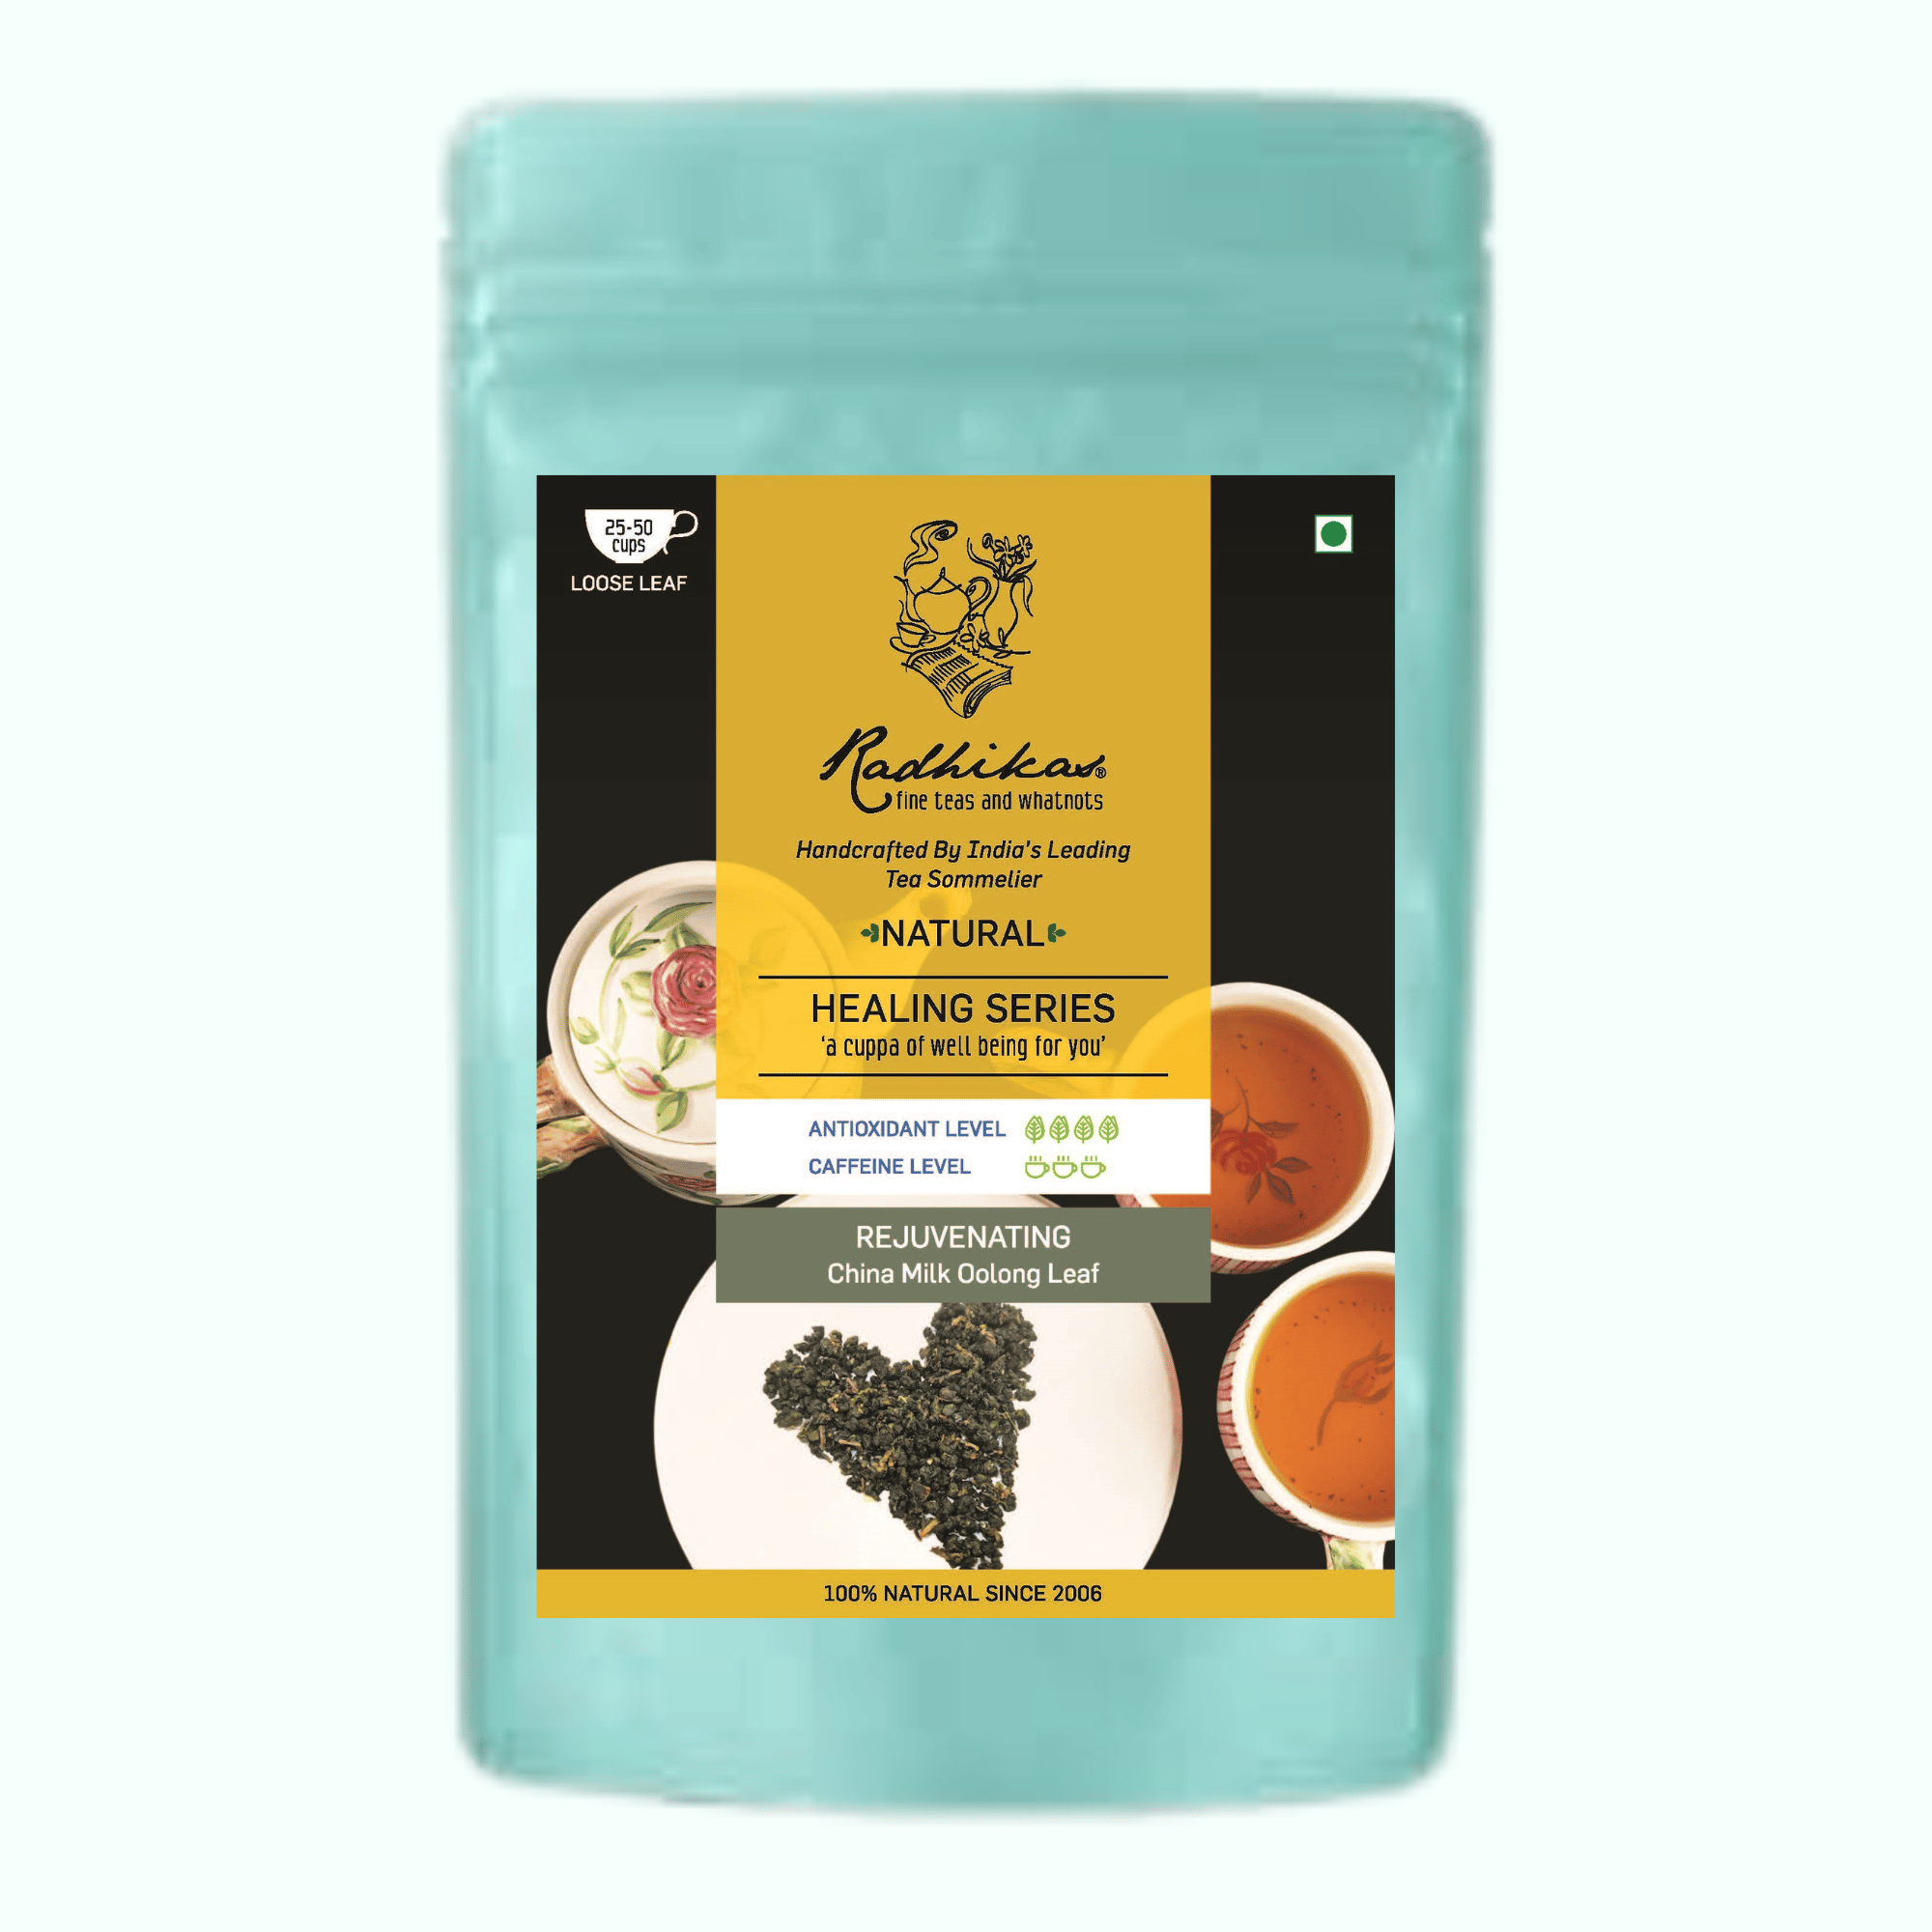 Radhikas Fine Teas and Whatnots REJUVENATING China Milk Oolong Leaf - A Tea for Relaxation and Vitality